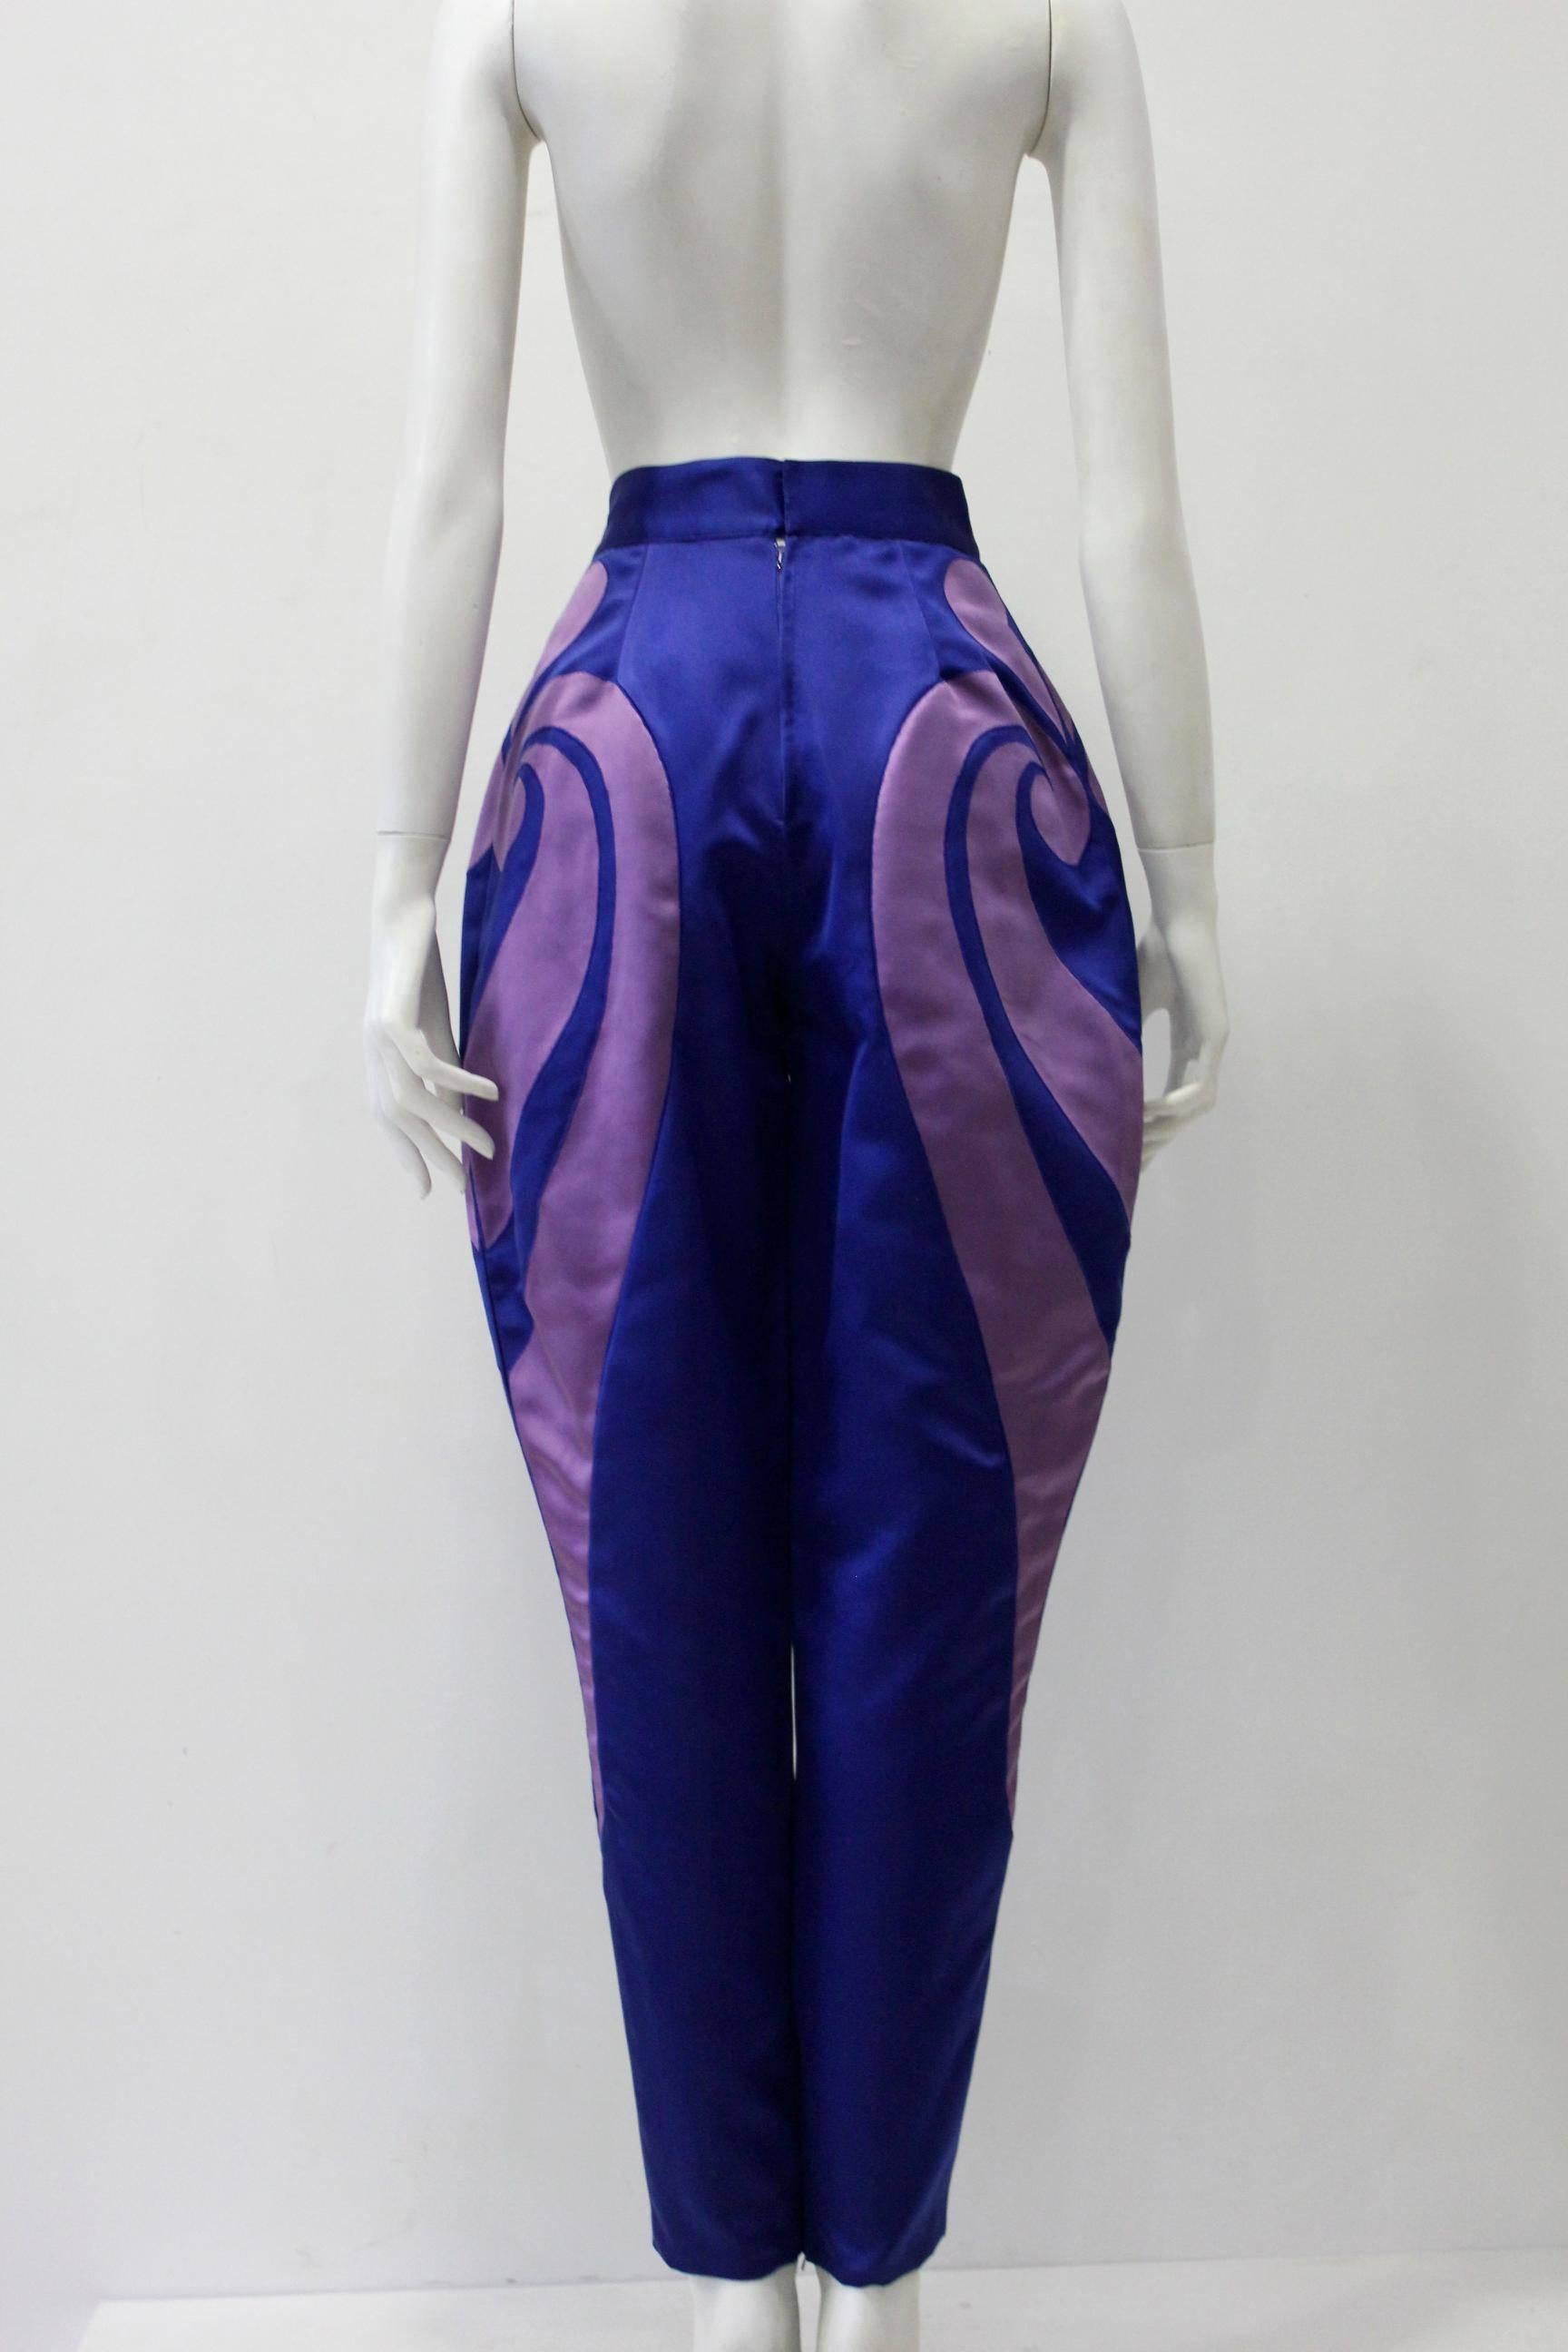 One Of A Kind Gianni Versace Silk Applique Jodhpurs Spring 1990 For Sale 1